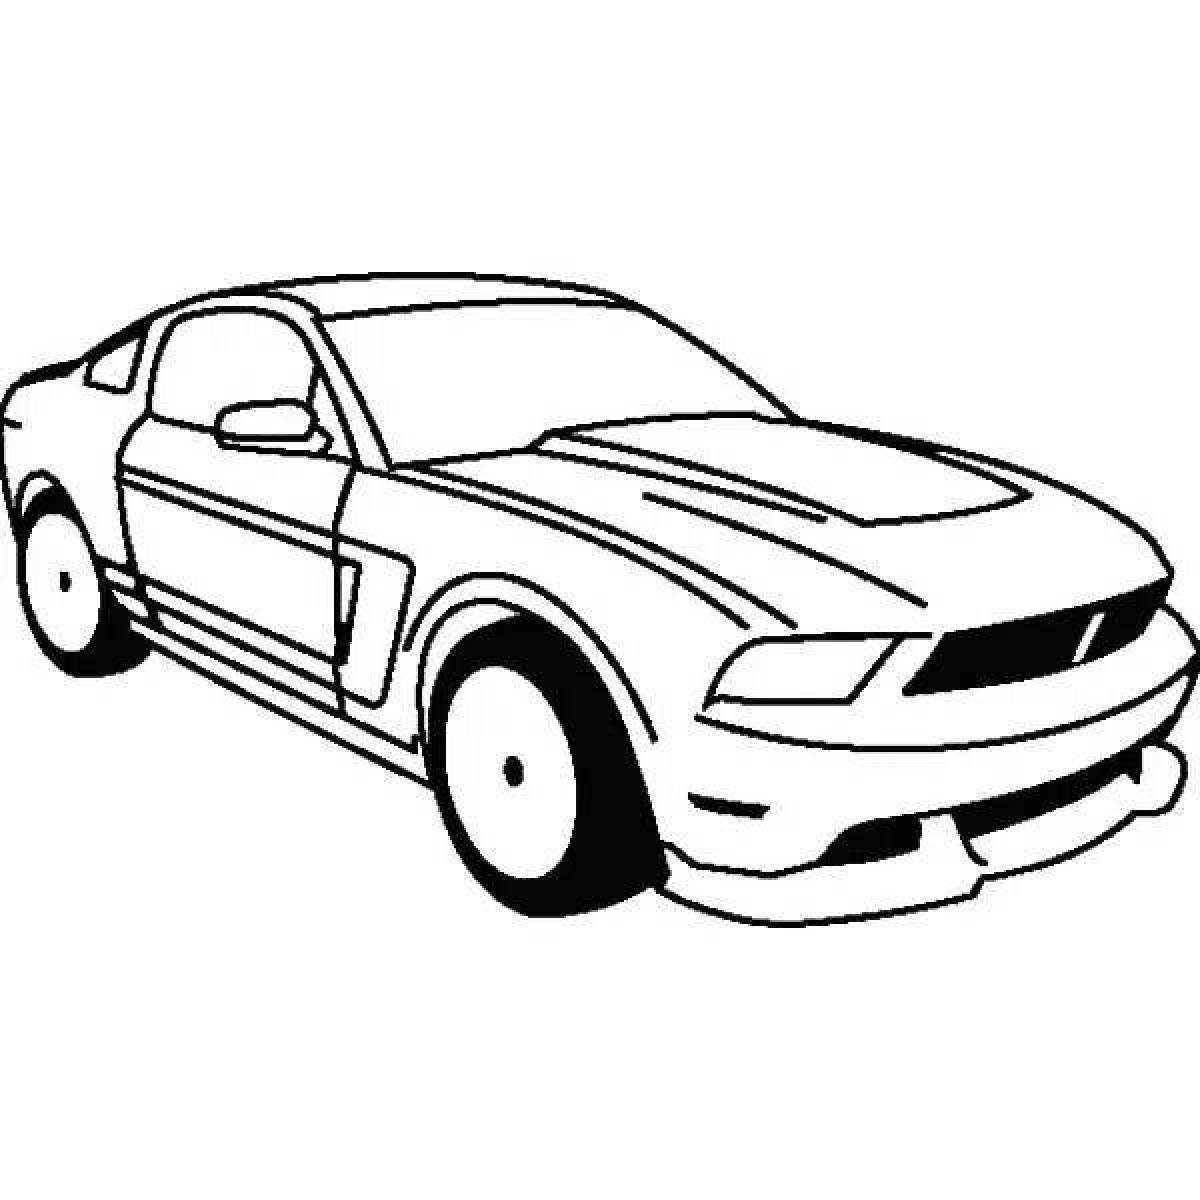 Coloring page amazing mustang car